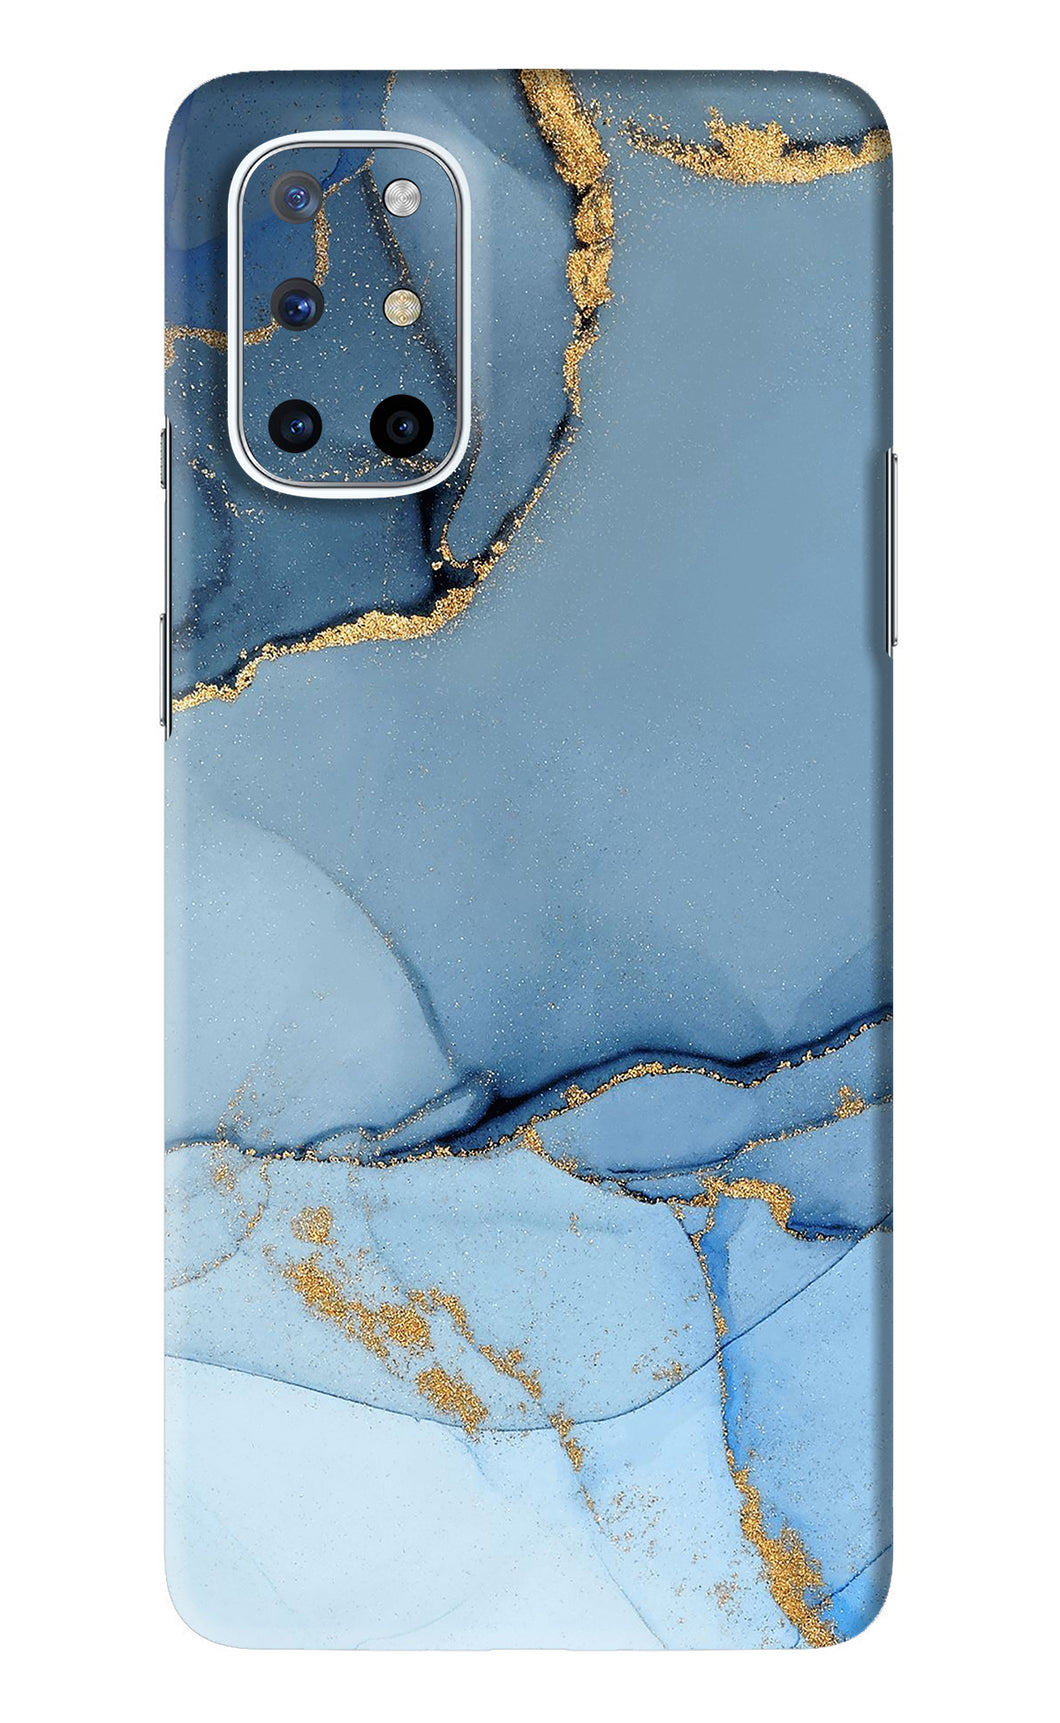 Blue Marble 1 OnePlus 8T Back Skin Wrap